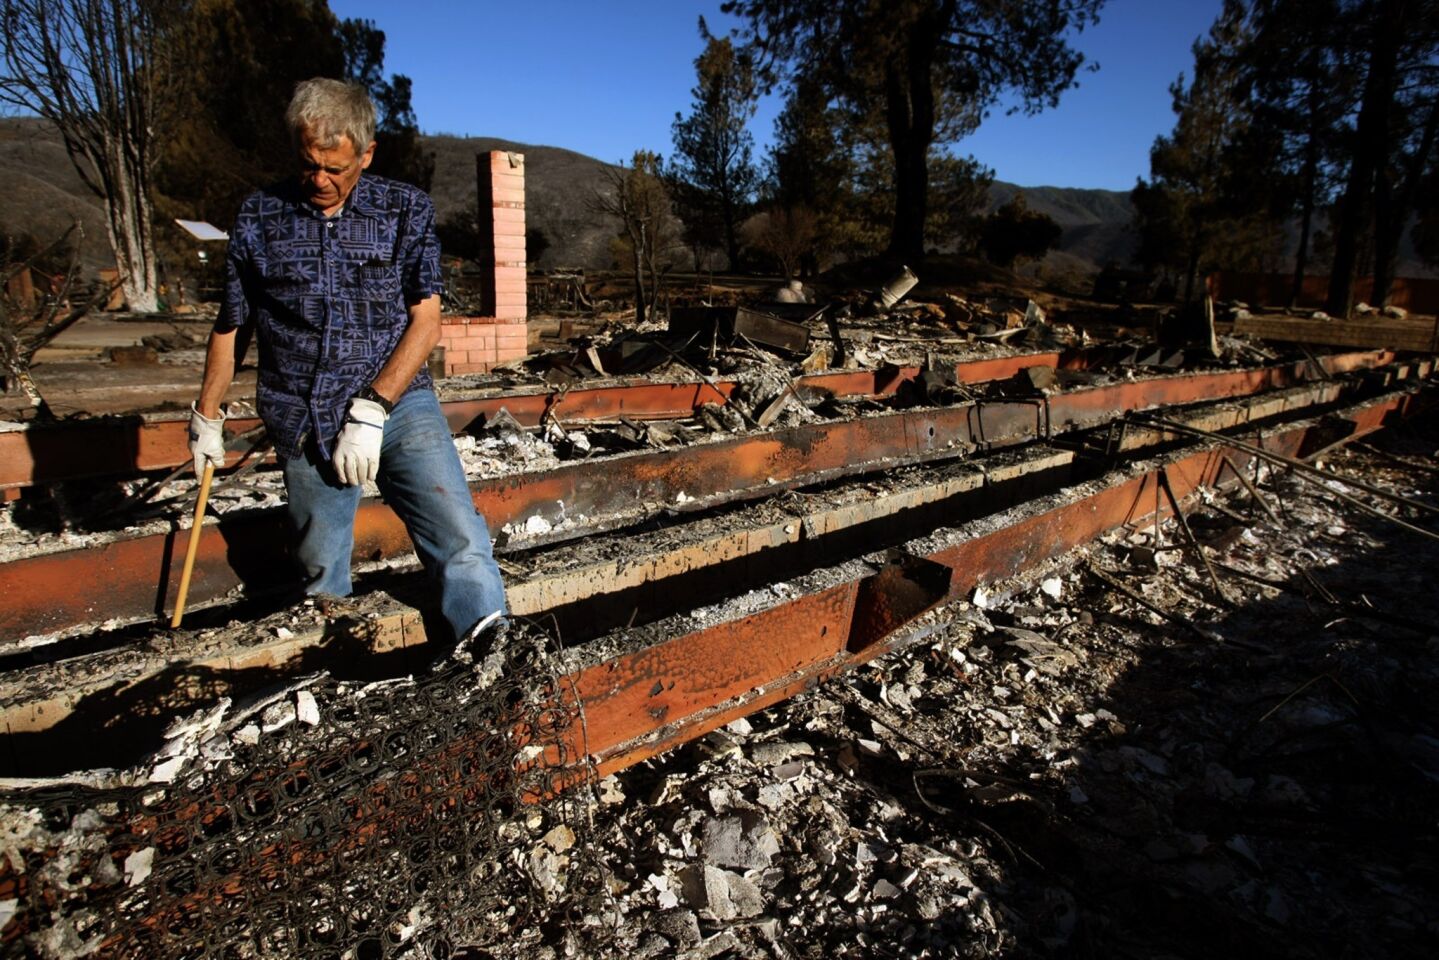 Joe Biviano, 63, returned to find his home burned to the ground by the Powerhouse fire on Sylvan Drive in Lake Hughes on Monday. "We lived here for 15 years, but lost 40 years of memories," Biviano said. "This is just stuff. But it still hurts when you don't have your stuff."